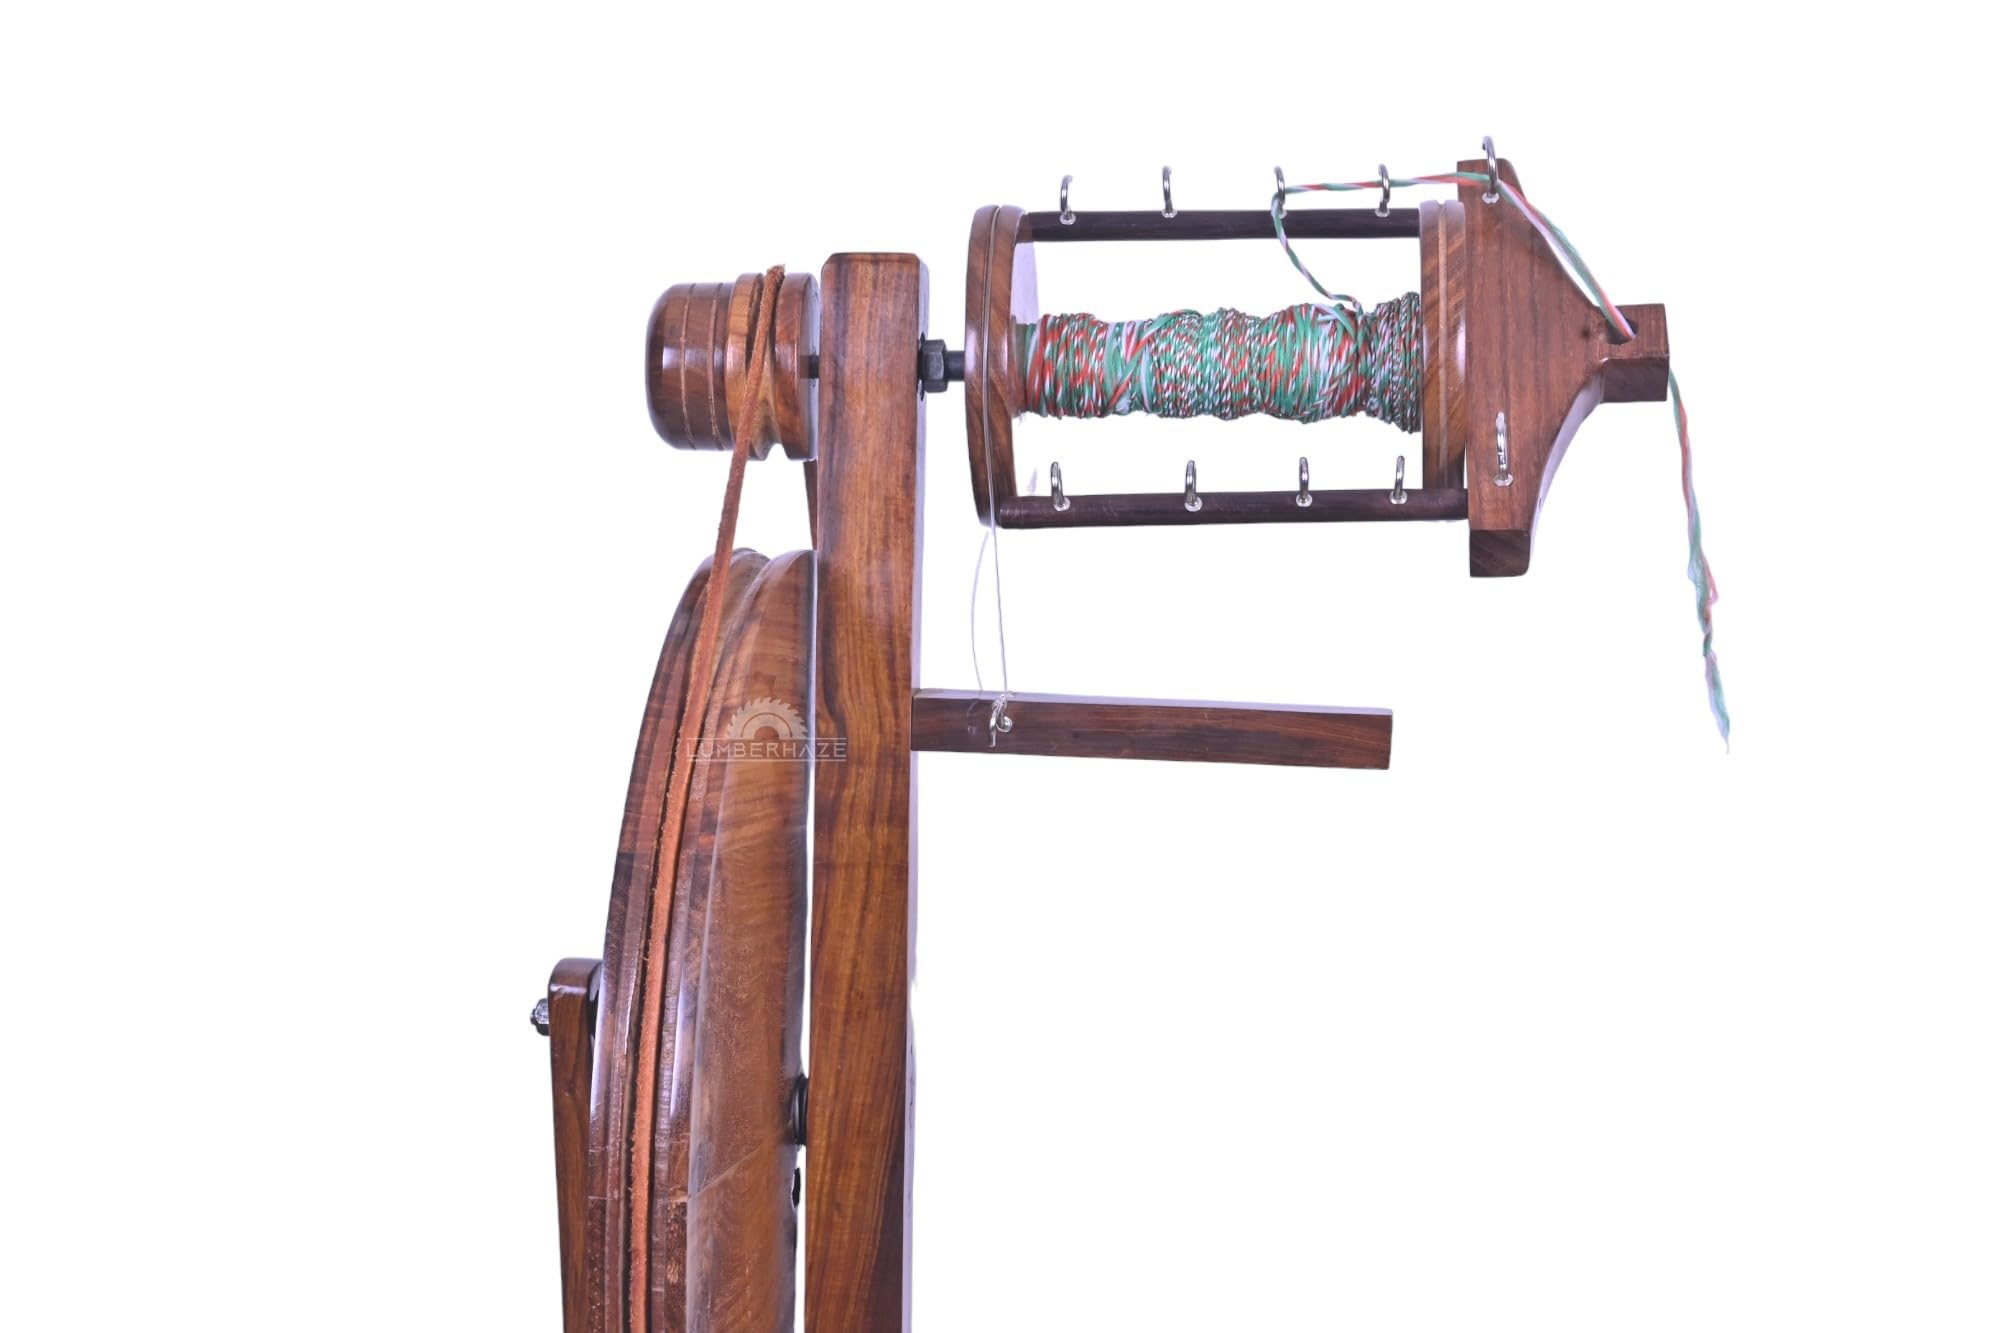 Lumberkart Handmade Wooden Spinning Wheel with 3 Bobbins for Beginners and Professional Spinners, 16 Inch Wheel